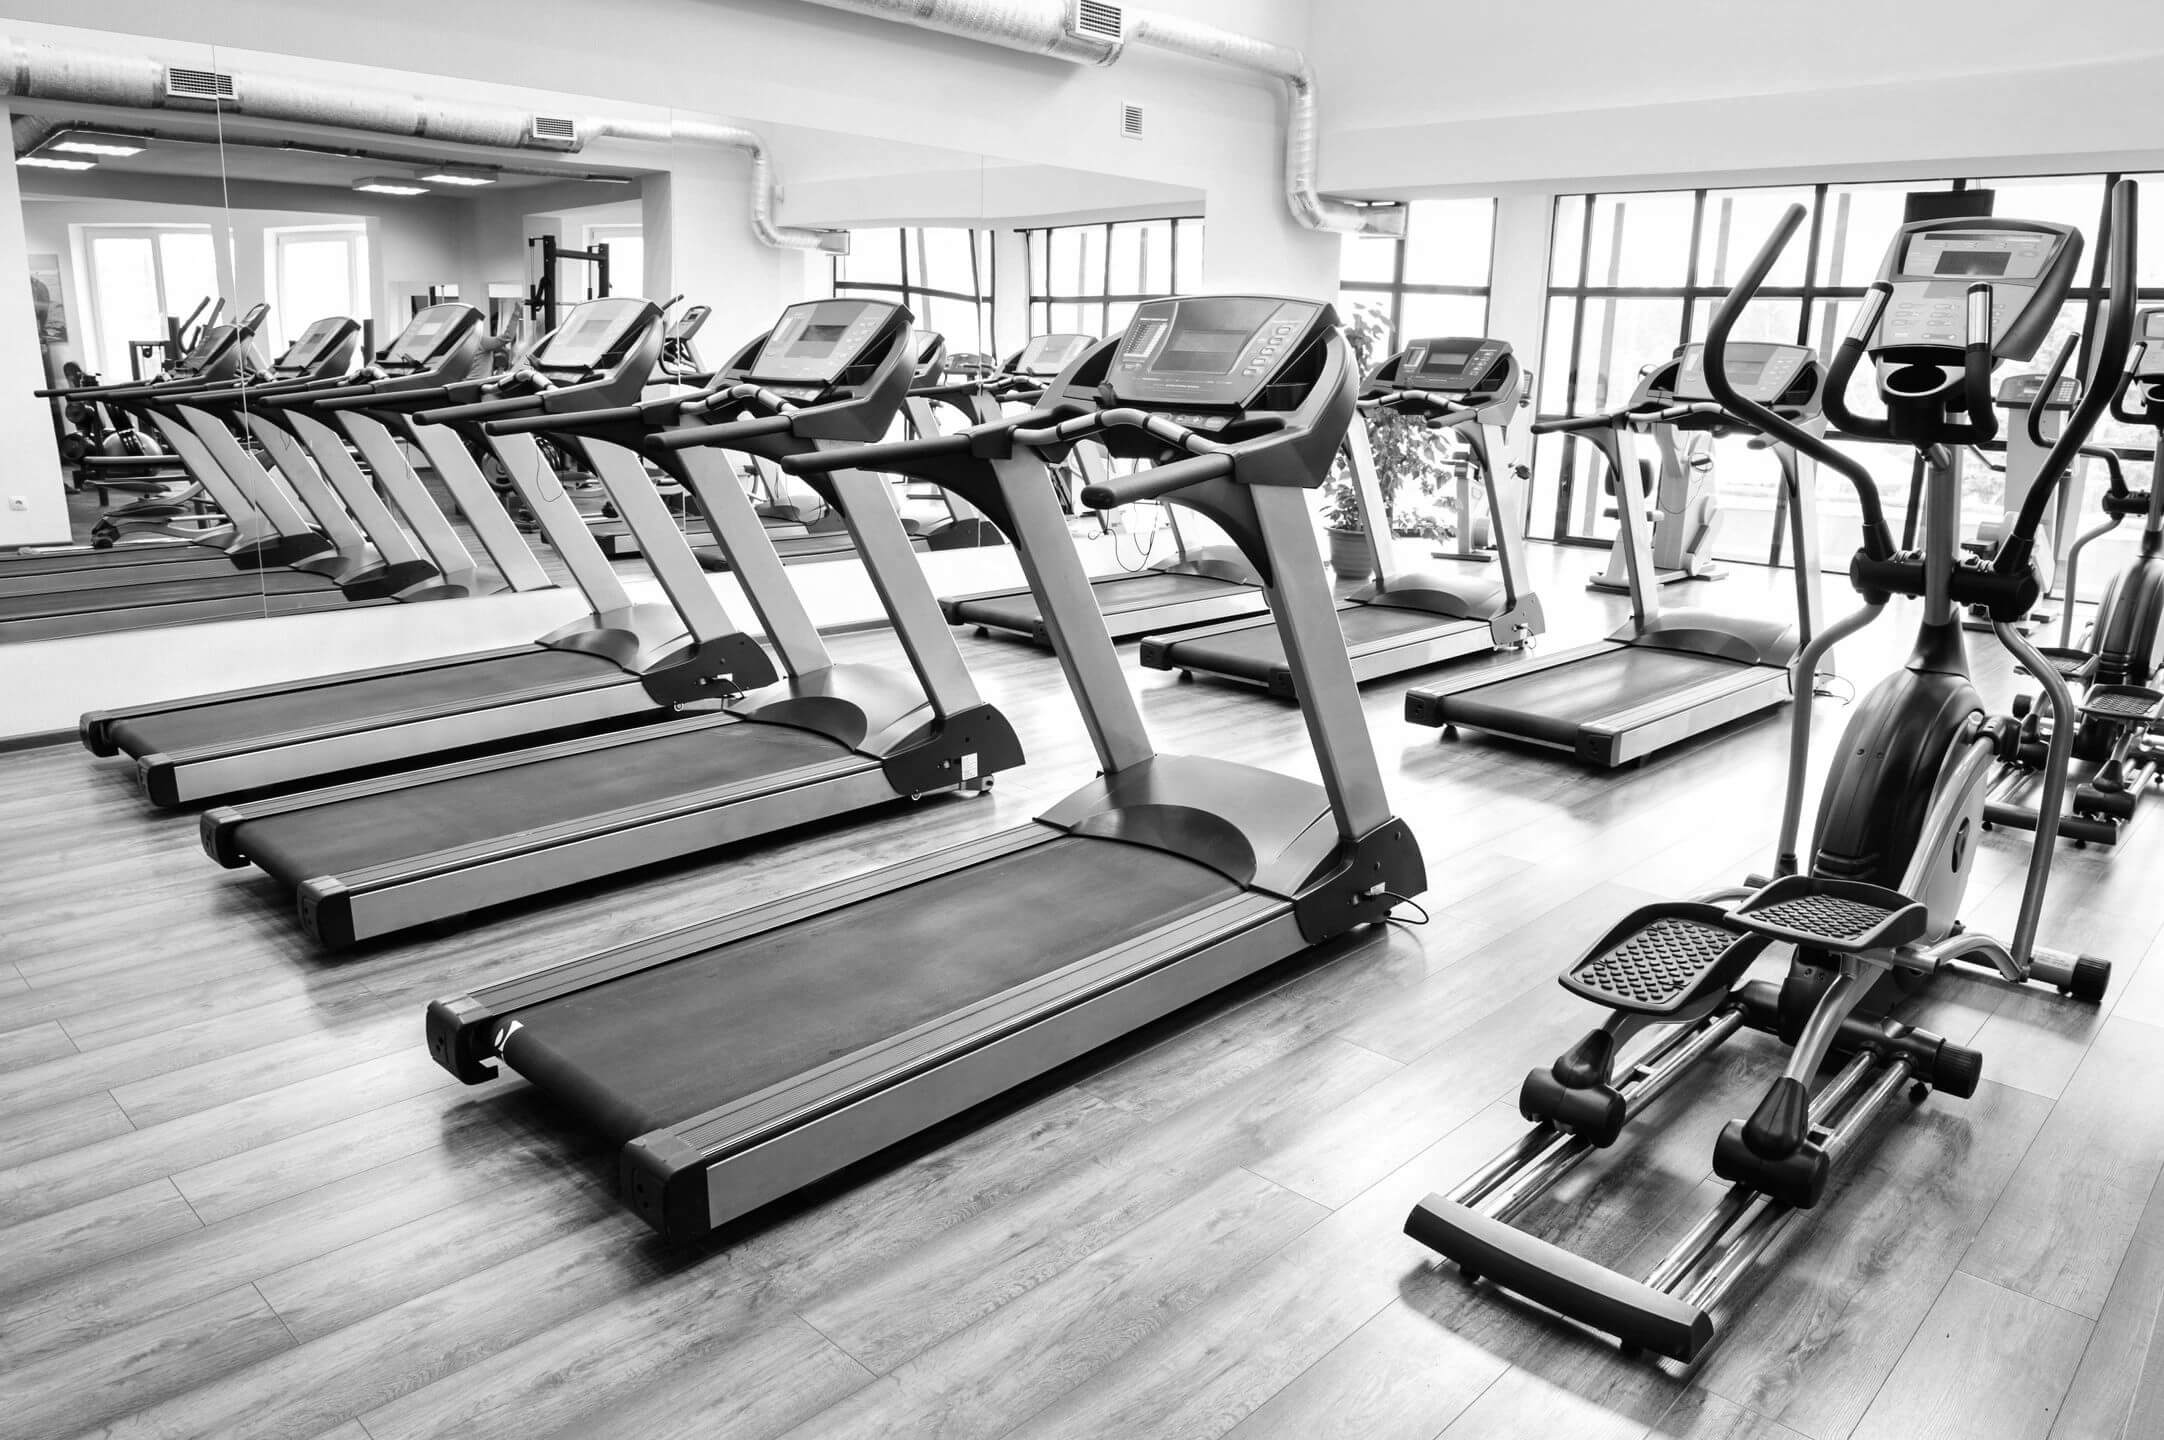 Why Cleanliness is Important in the Gym?